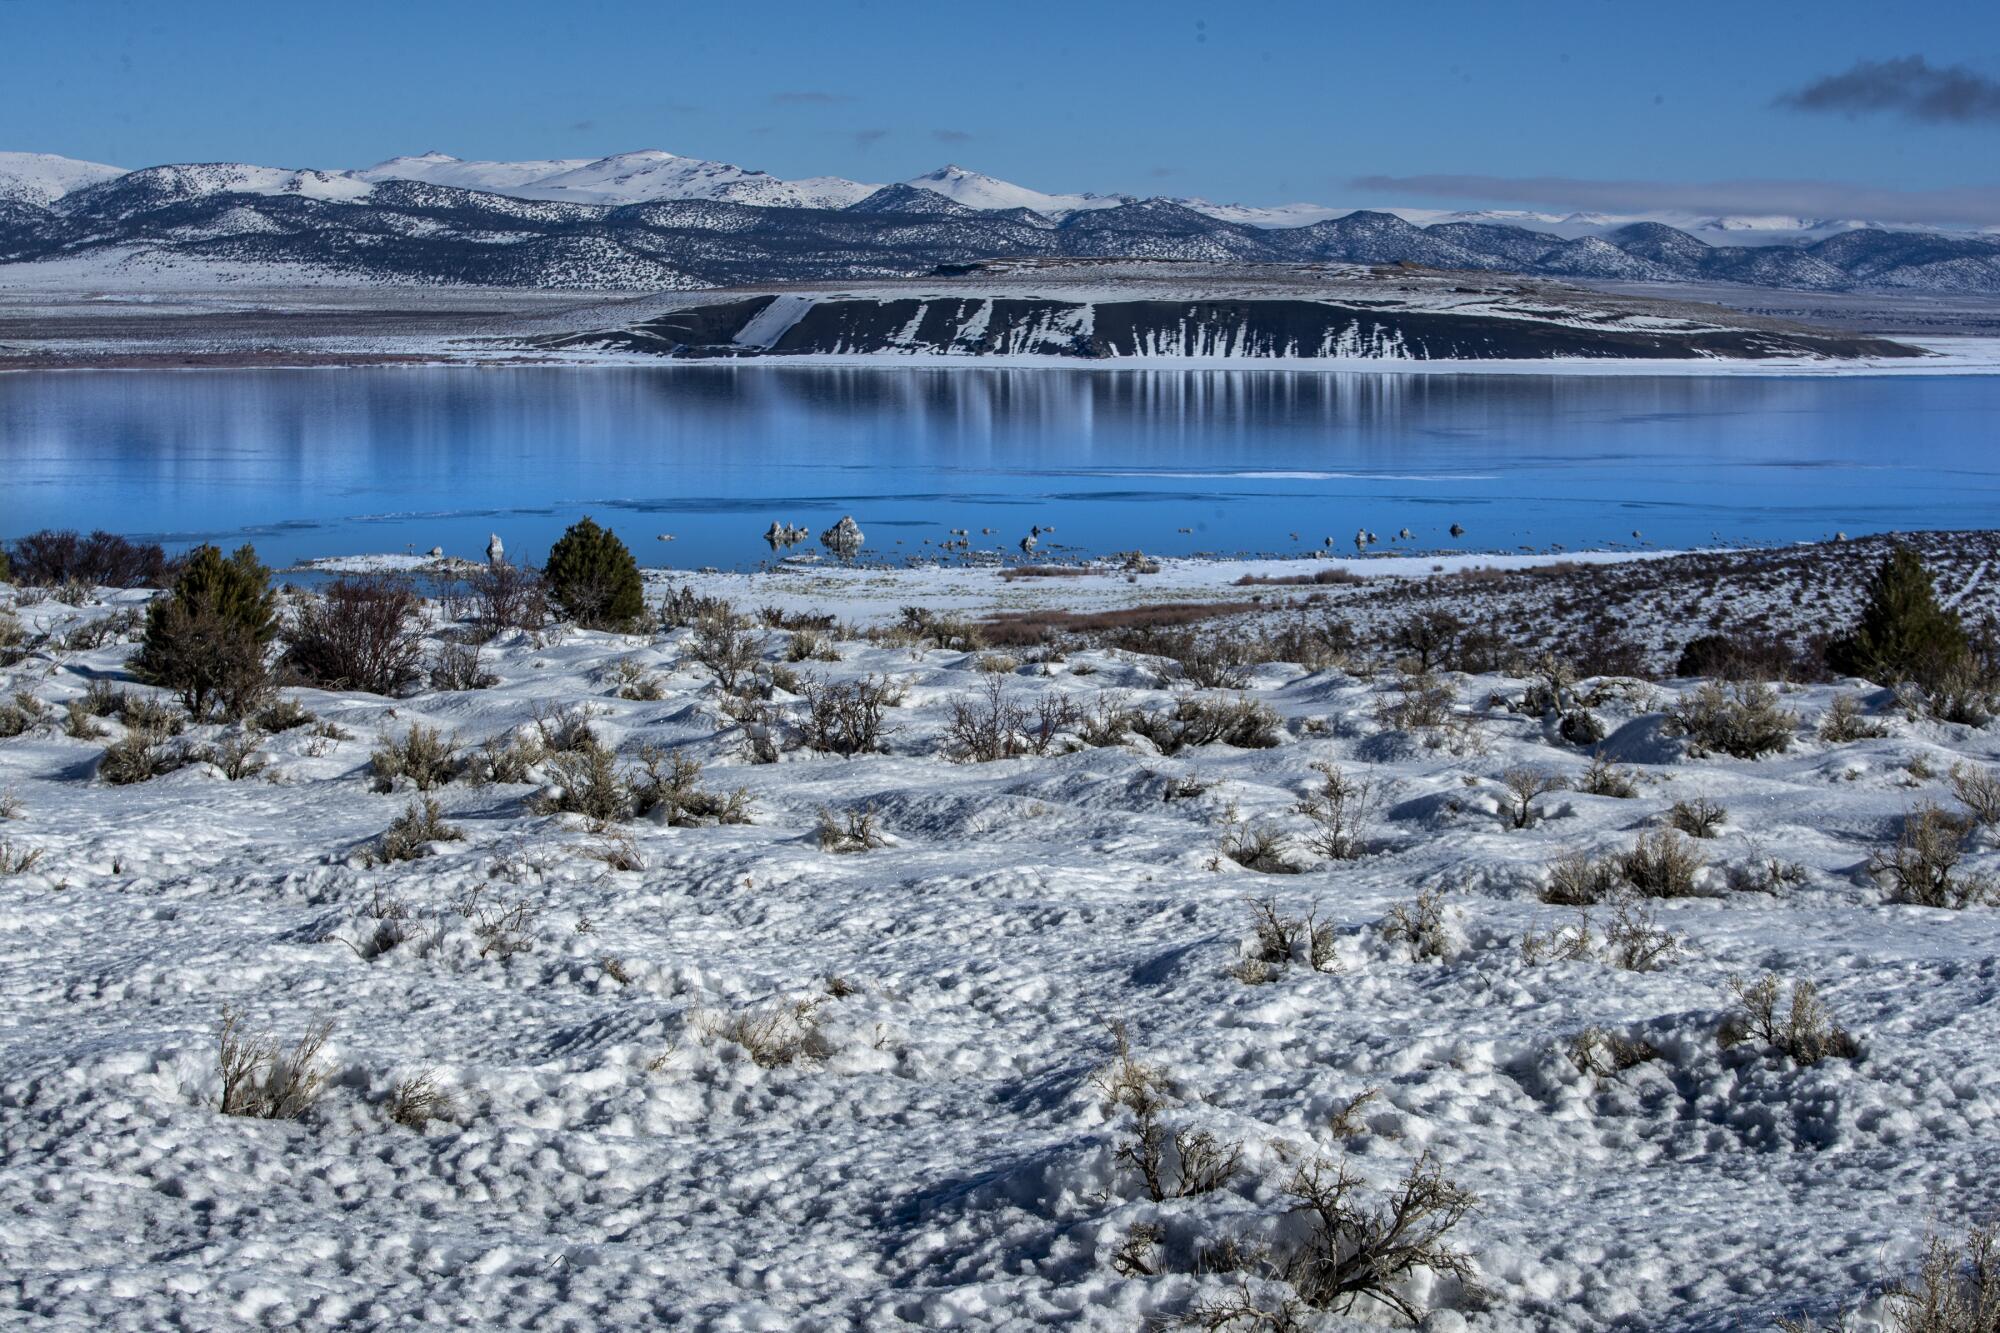 View of Black Point on the north shore of Mono Lake. The north shore was a site of Native American massacres in the 1800s.